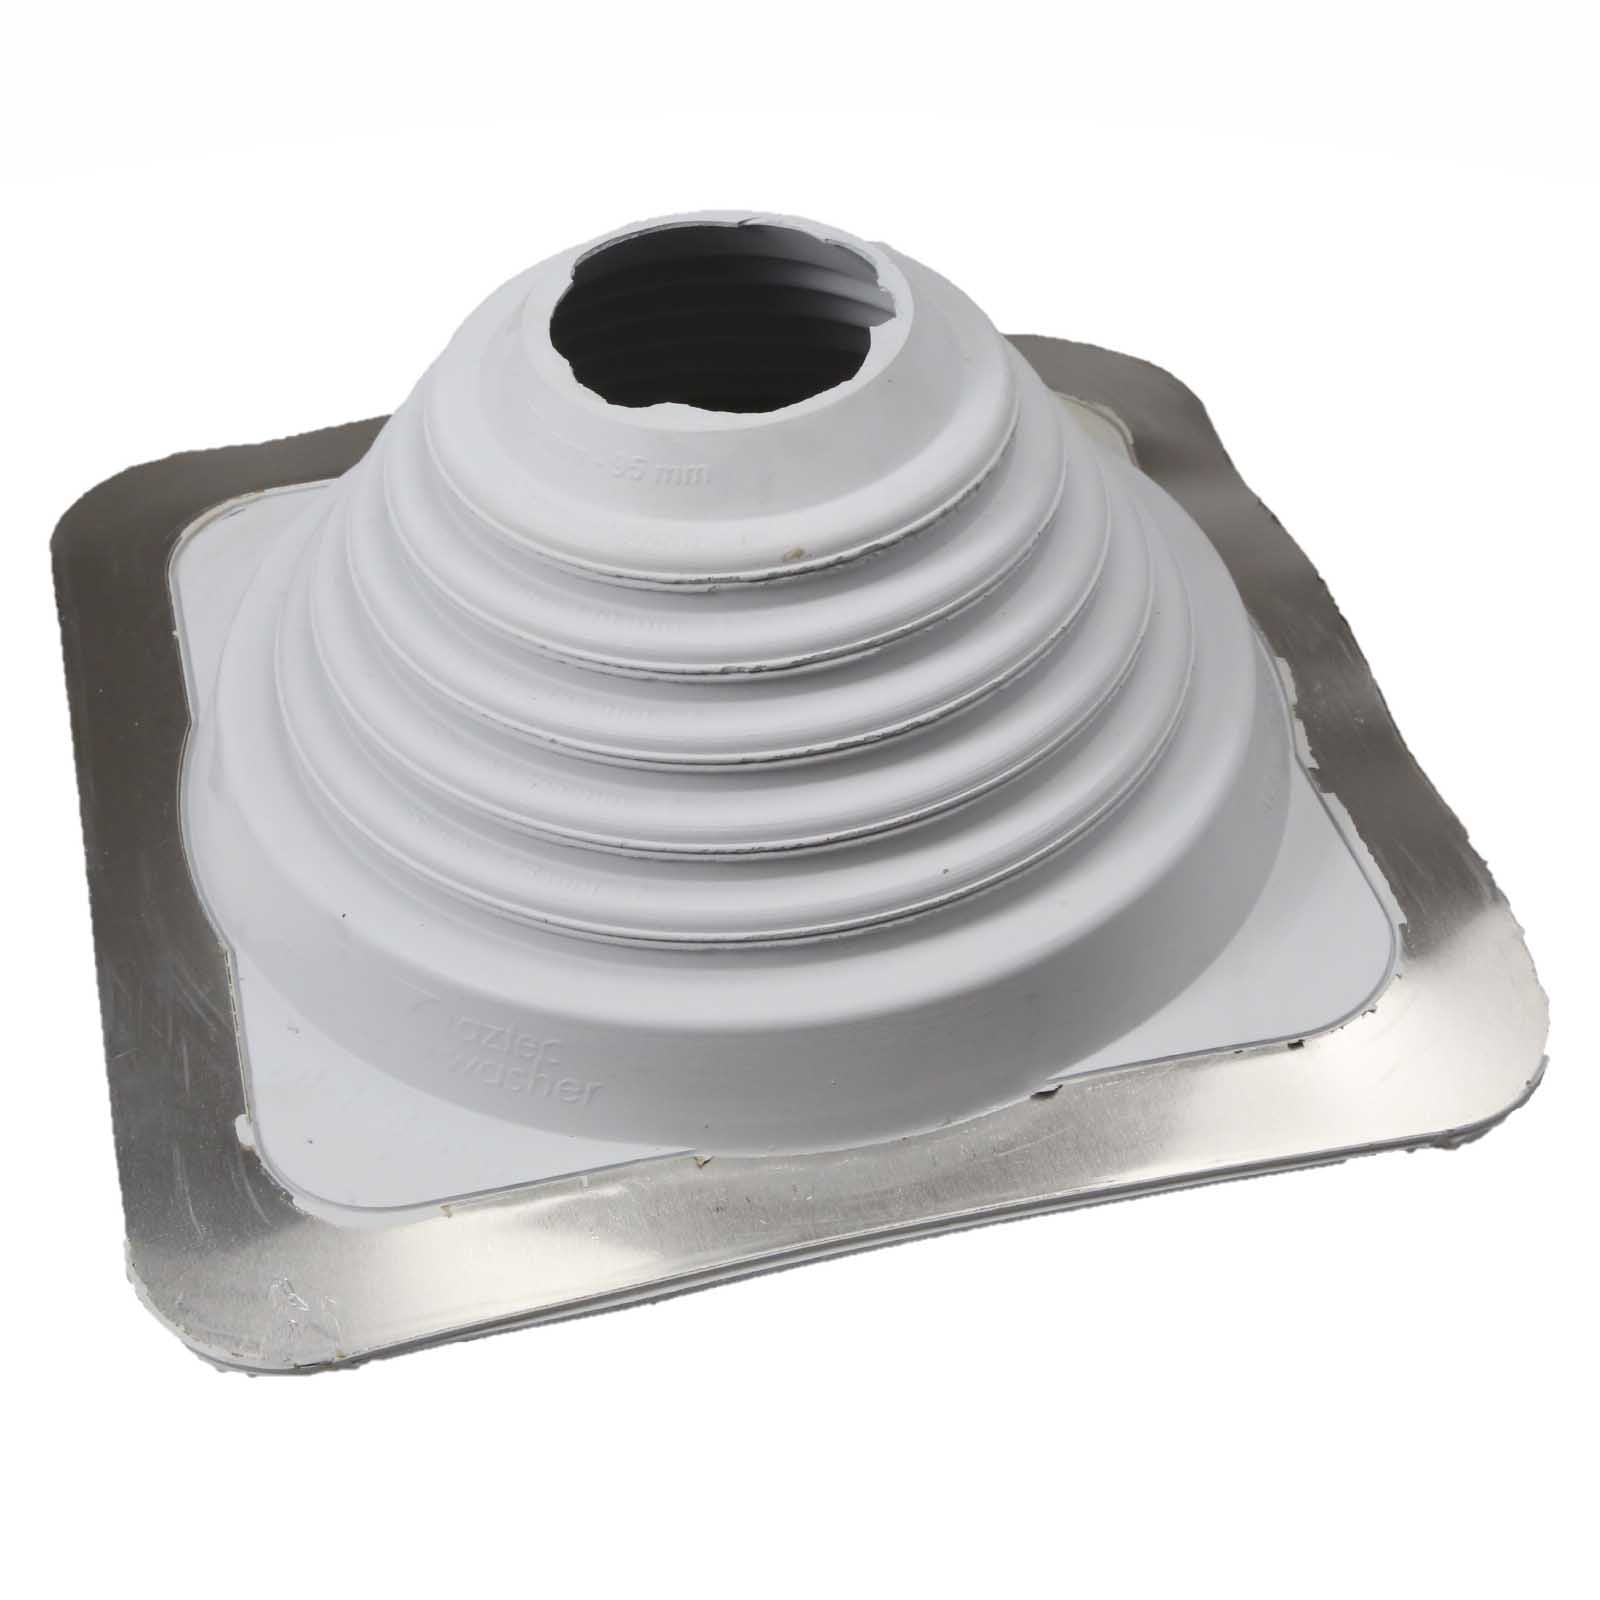 #4 Roofjack Square EPDM Pipe Flashing Boot Gray